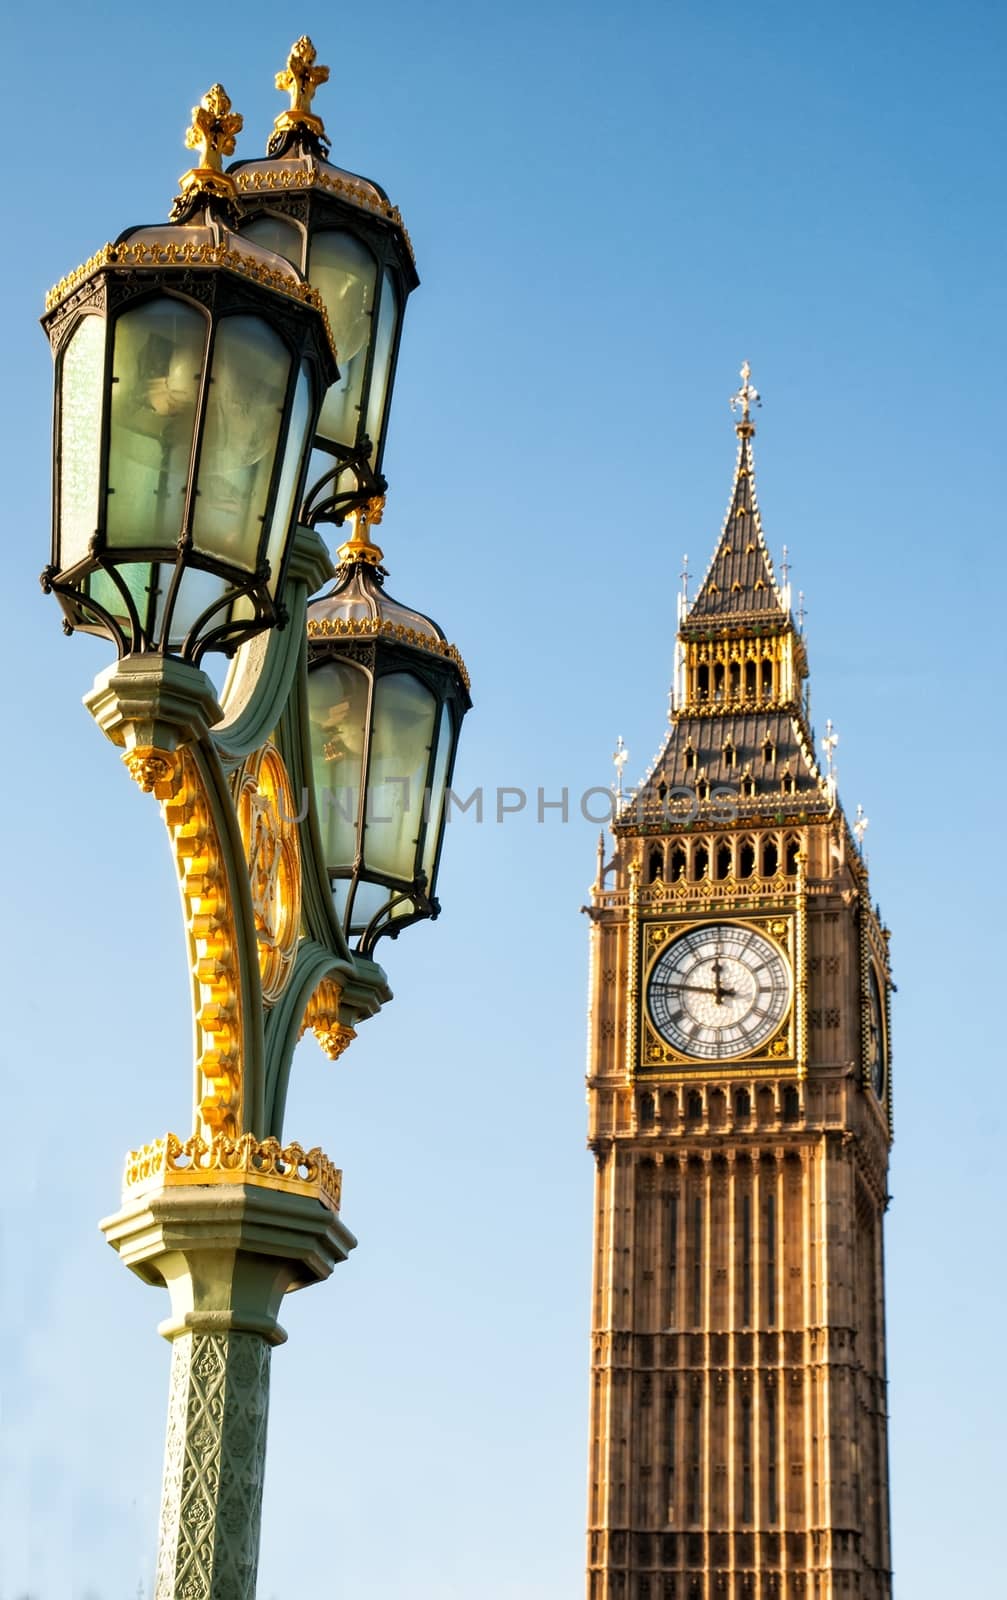 The Clock Tower, named in tribute to Queen Elizabeth II, more popularly known as Big Ben.